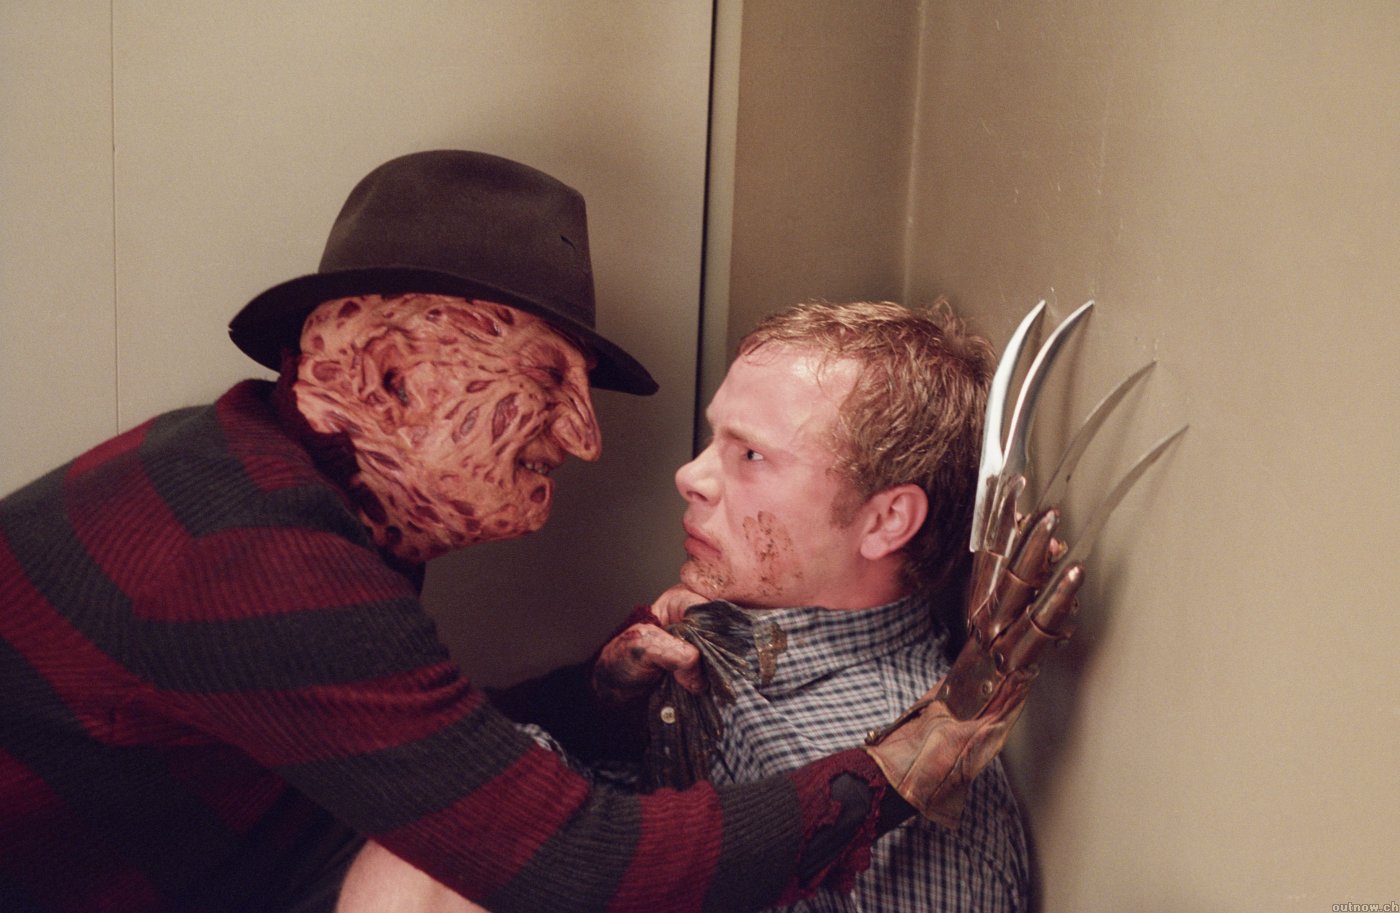 10 Things I Hate About: Freddy VS Jason